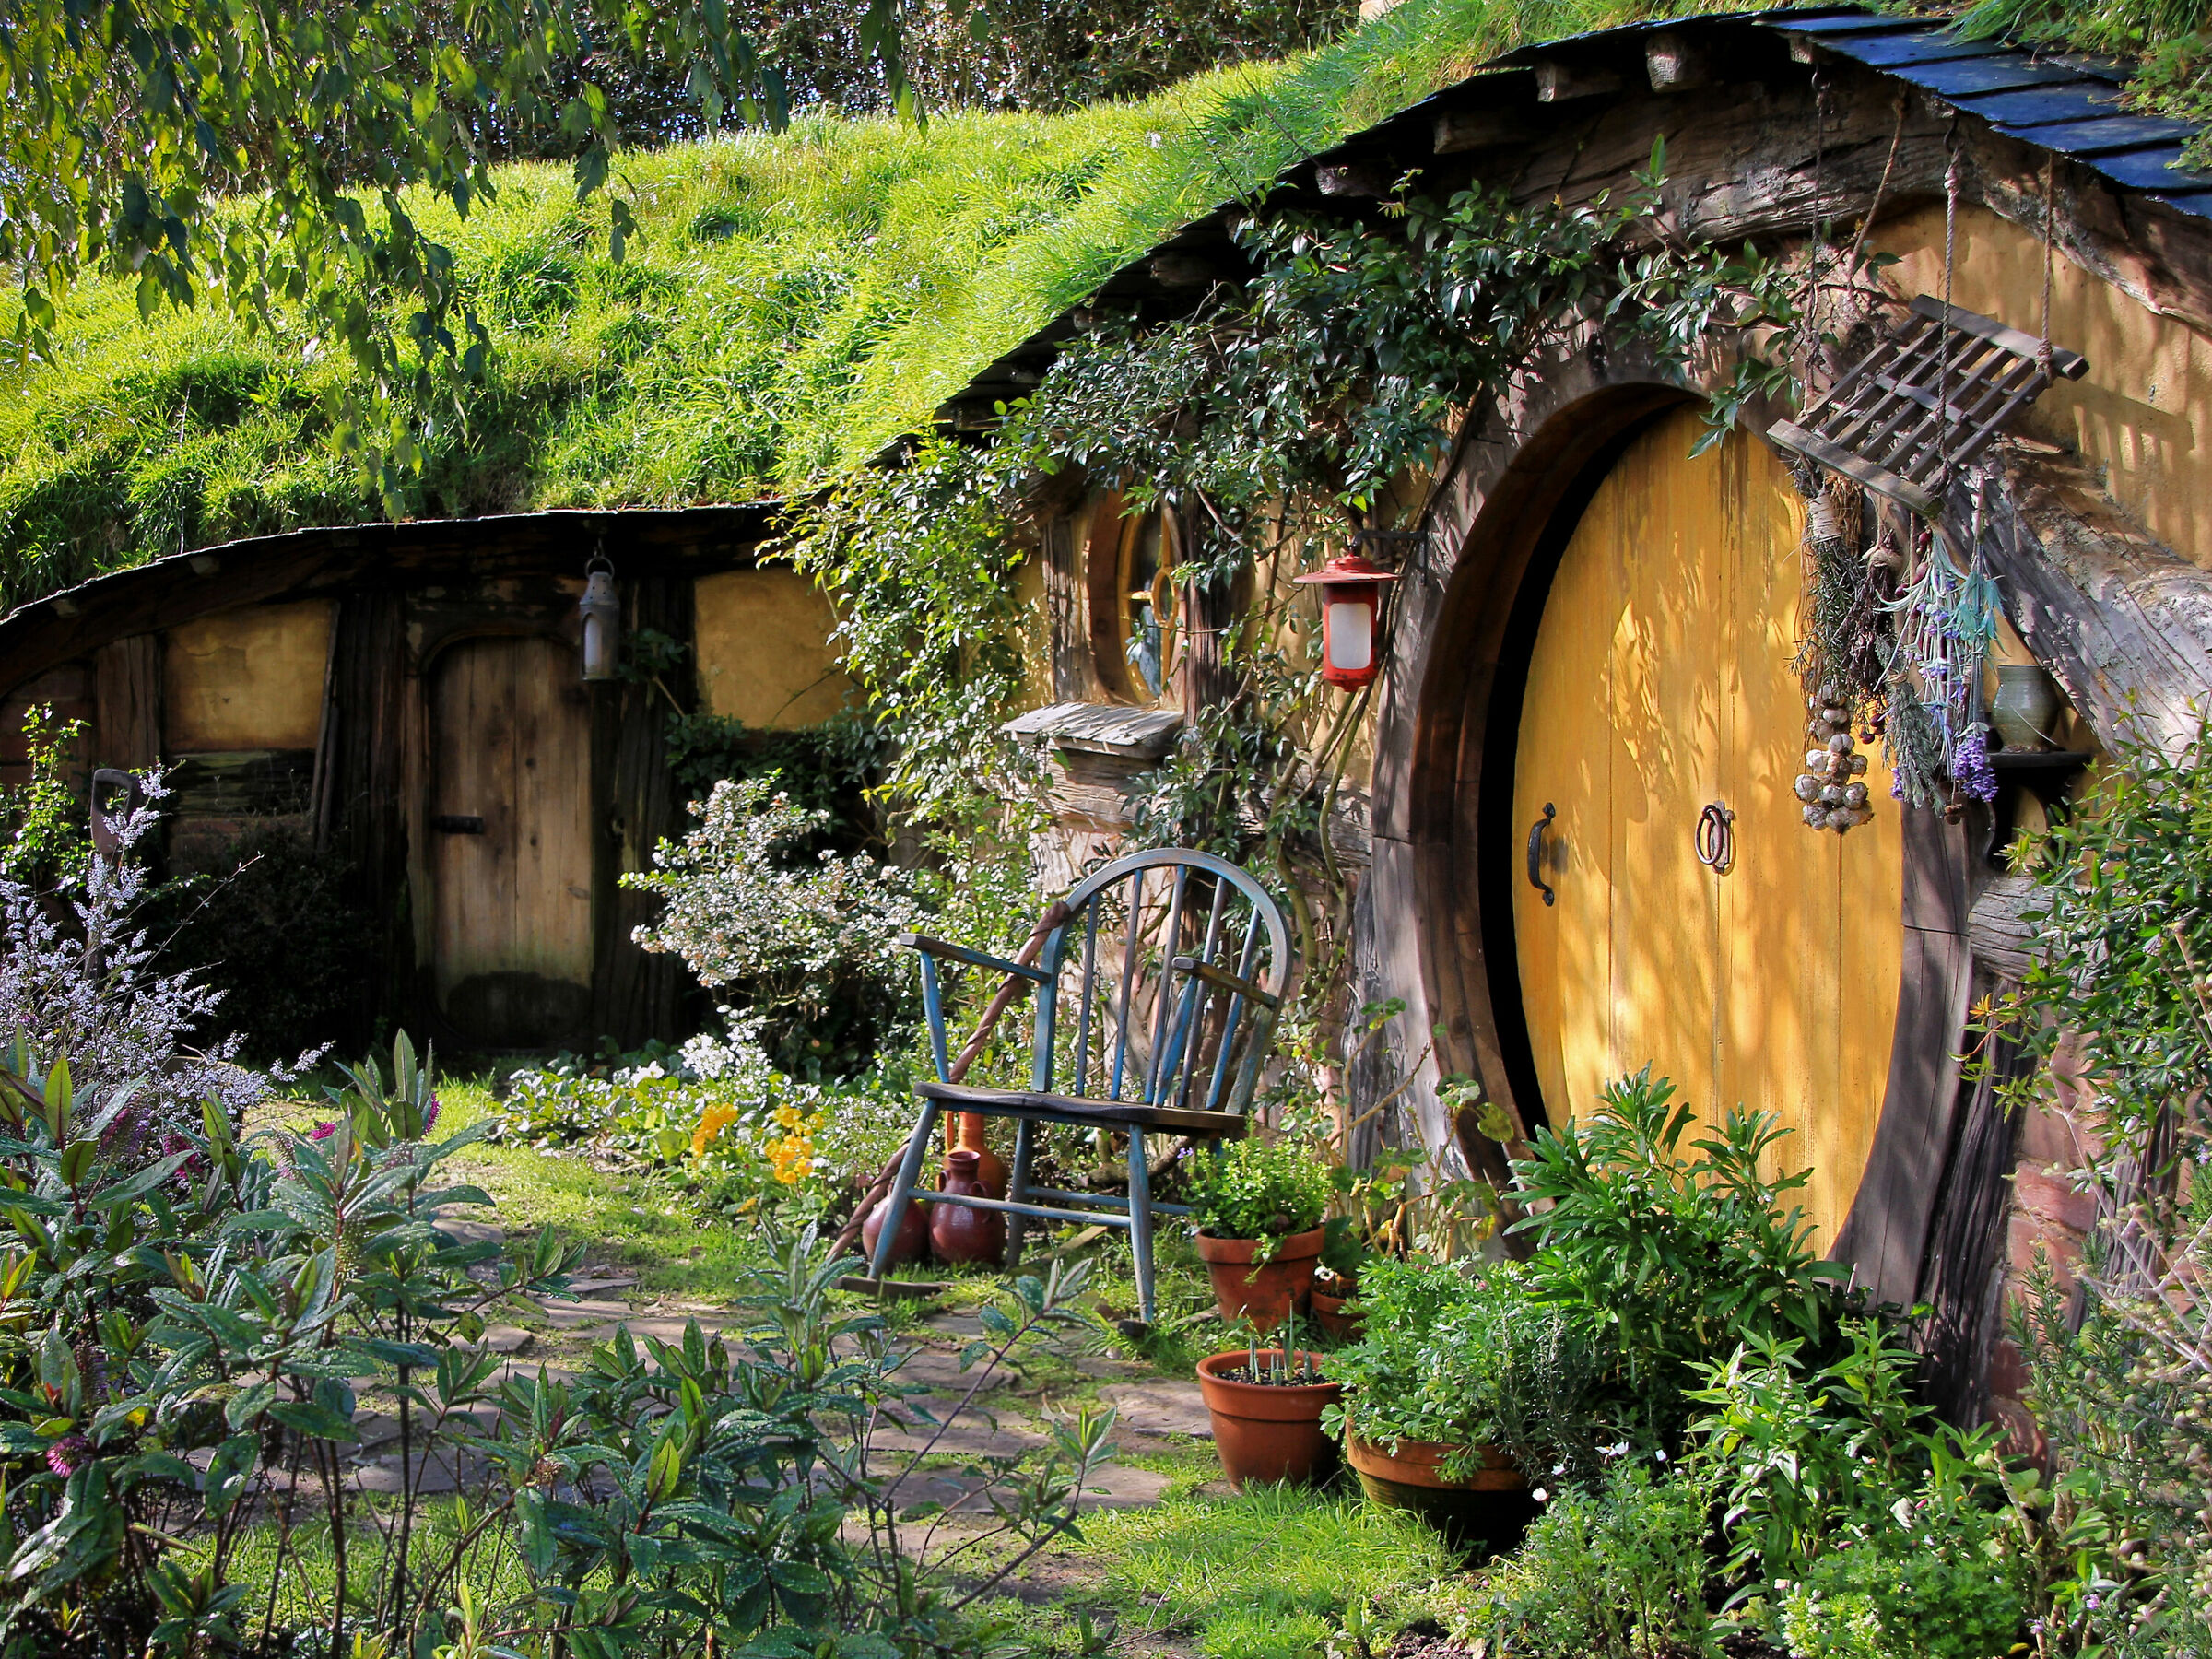 The Shire...